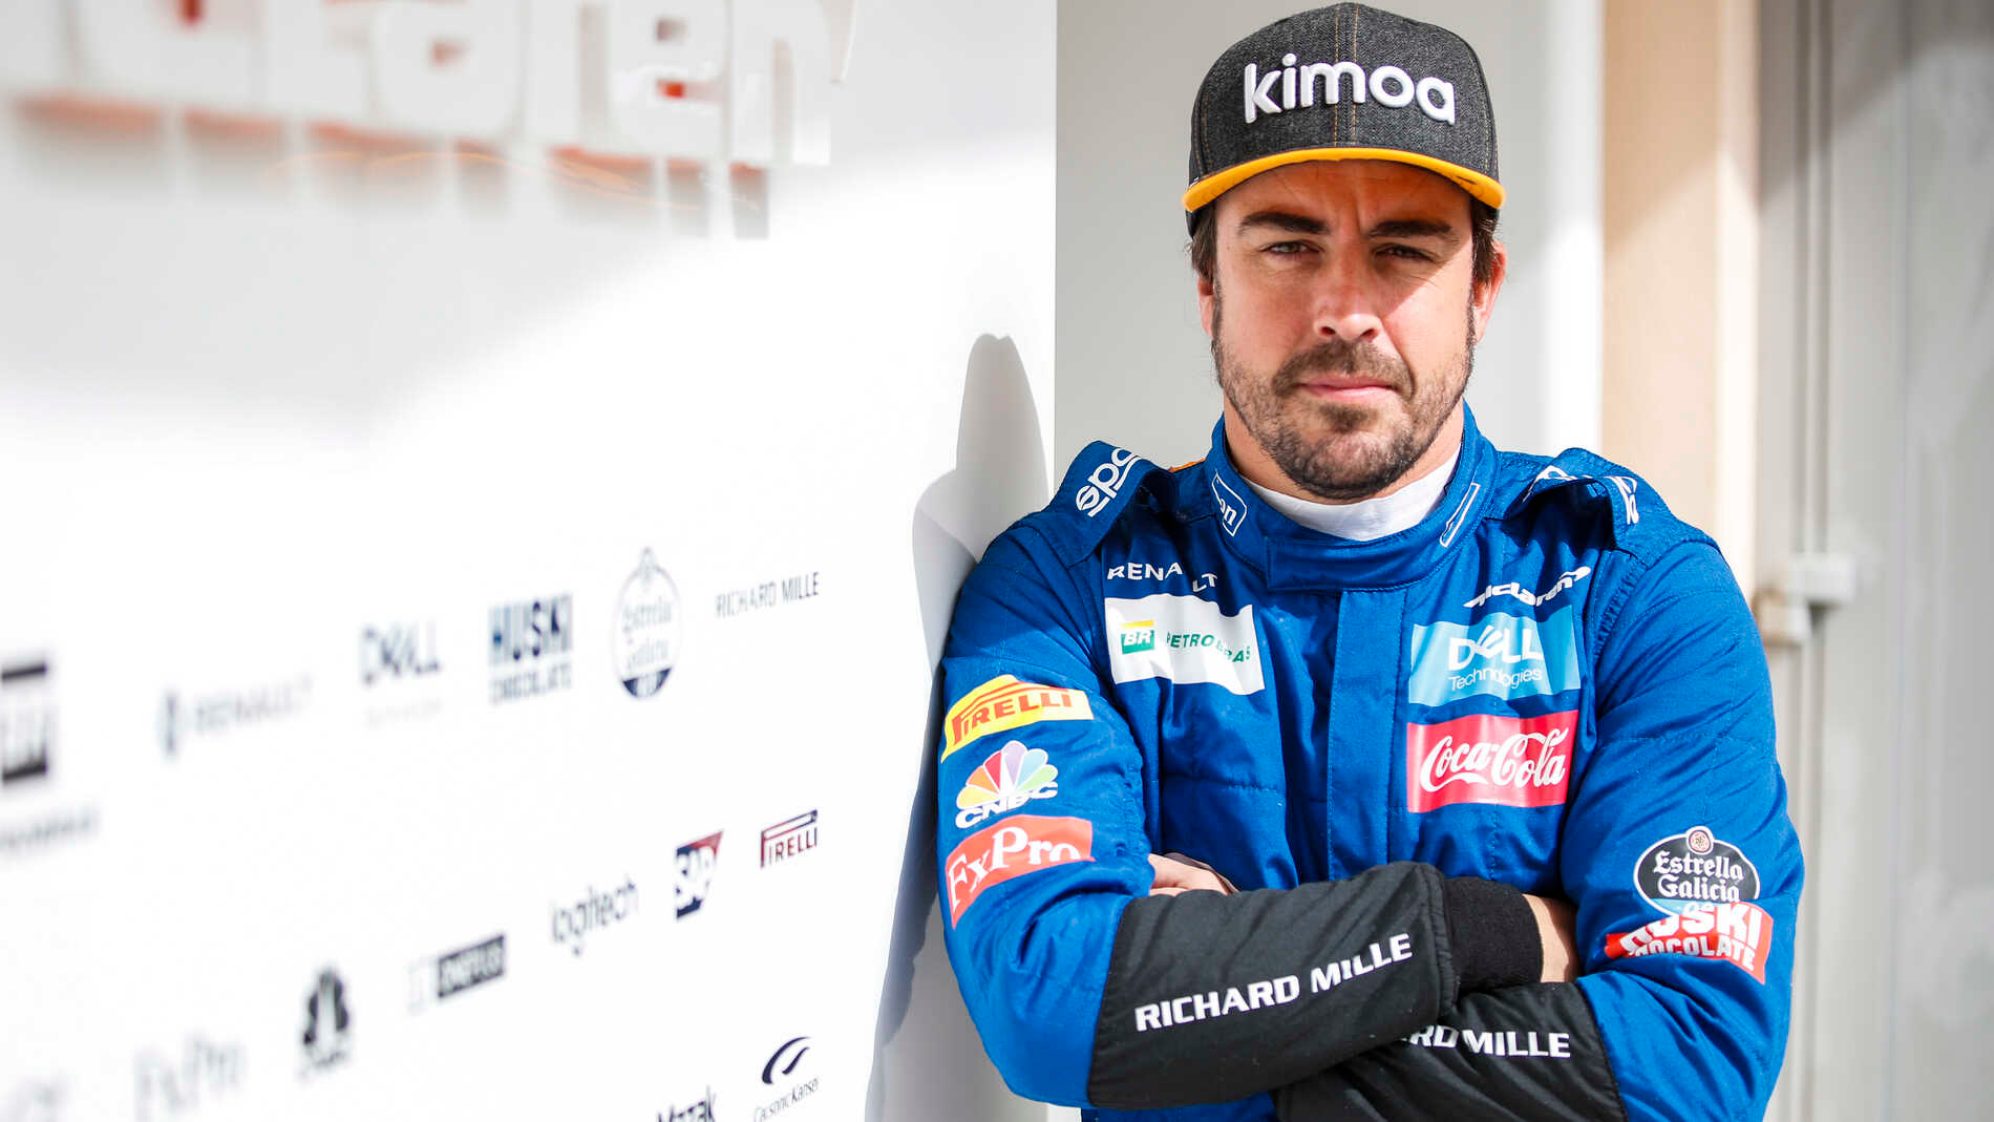 Brown says Alonso is NOT central to a full-time McLaren team in F1